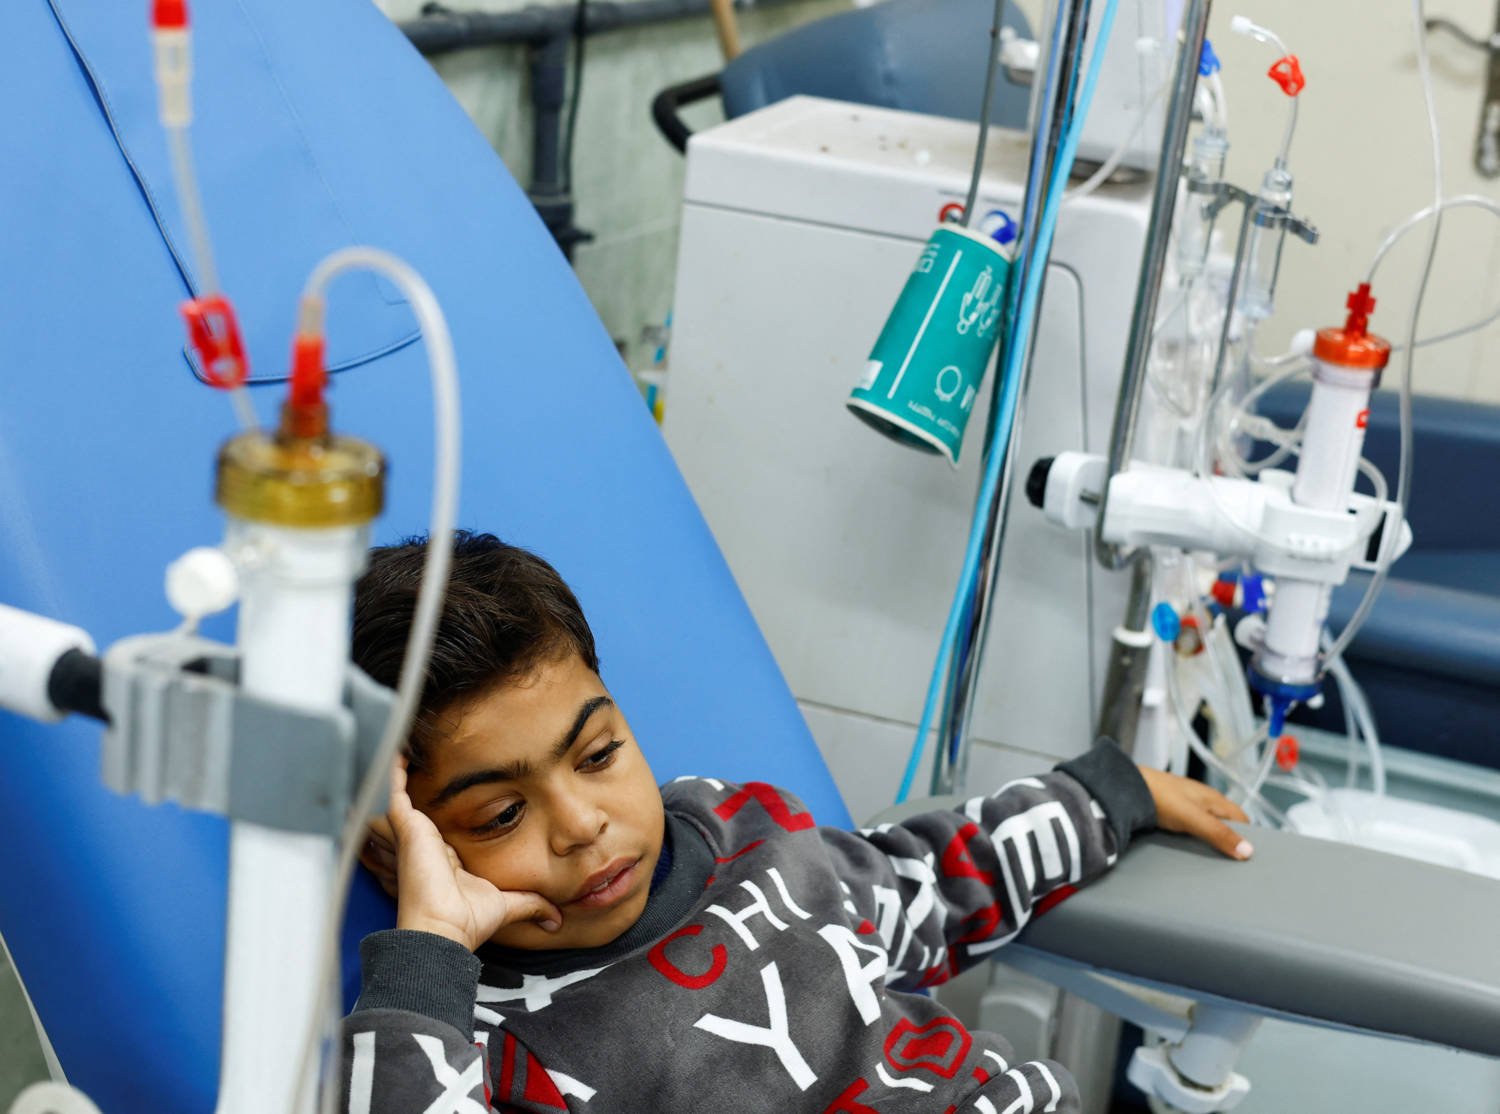 Gaza Boy On Dialysis Afraid He Will Never See His Family Again